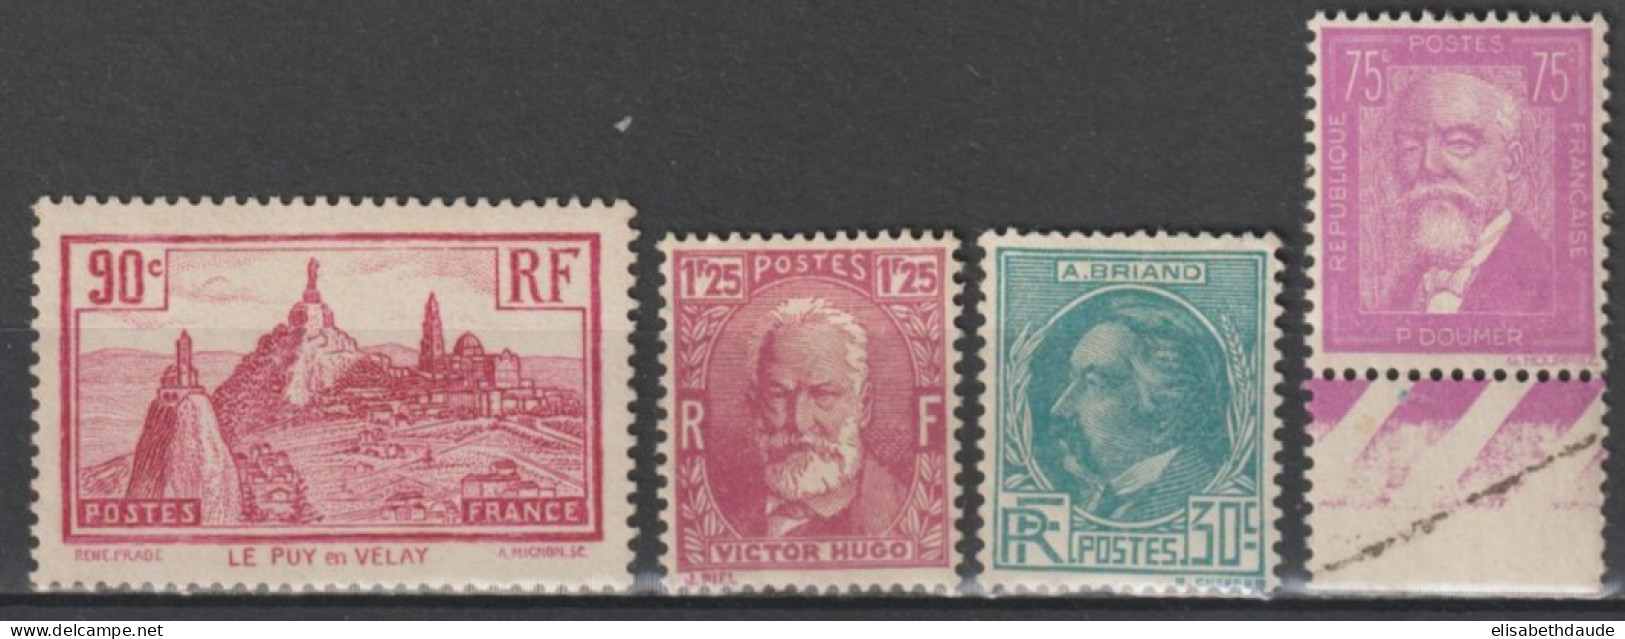 1933 - ANNEE COMPLETE YVERT N° 290/293 * MLH CHARNIERE TRES LEGERE (SAUF ADHERENCE SUR LE 292) - COTE = 61 EUR. - - ....-1939